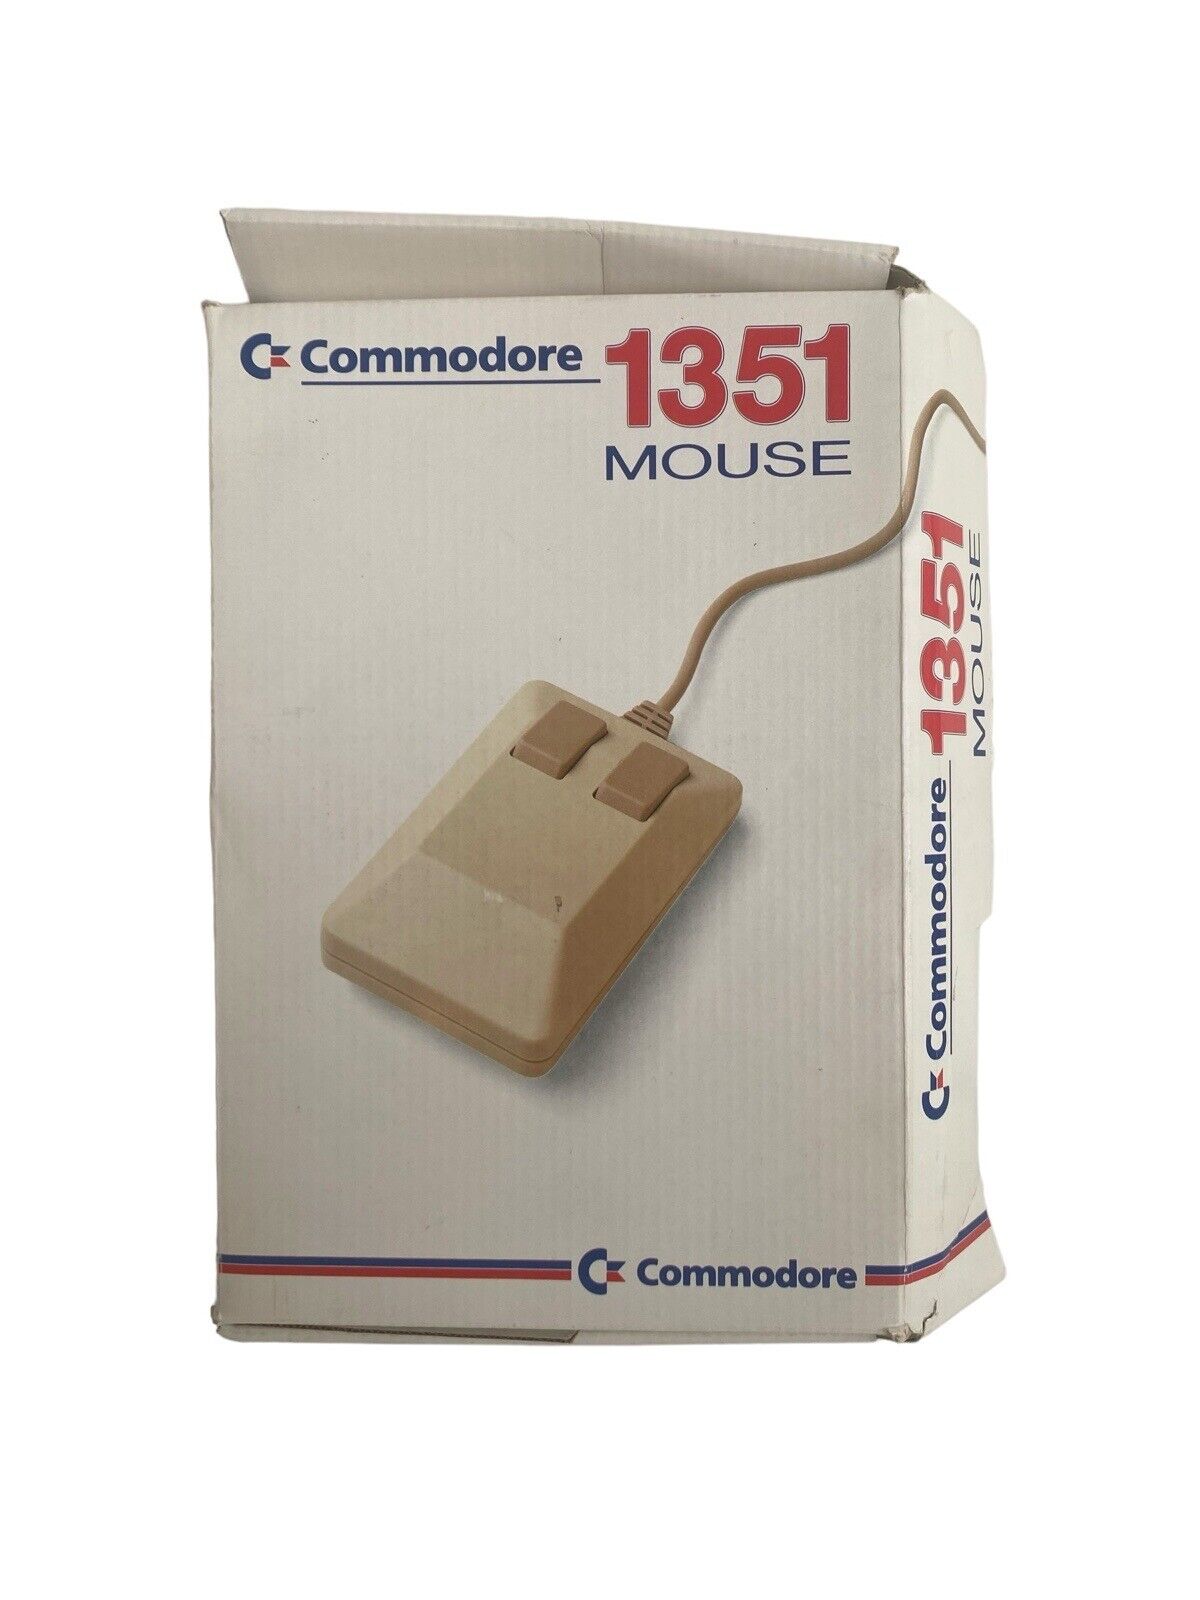 Commodore 1351 Mouse for the Commodore 64 64C 128 With Box No Manual Tested